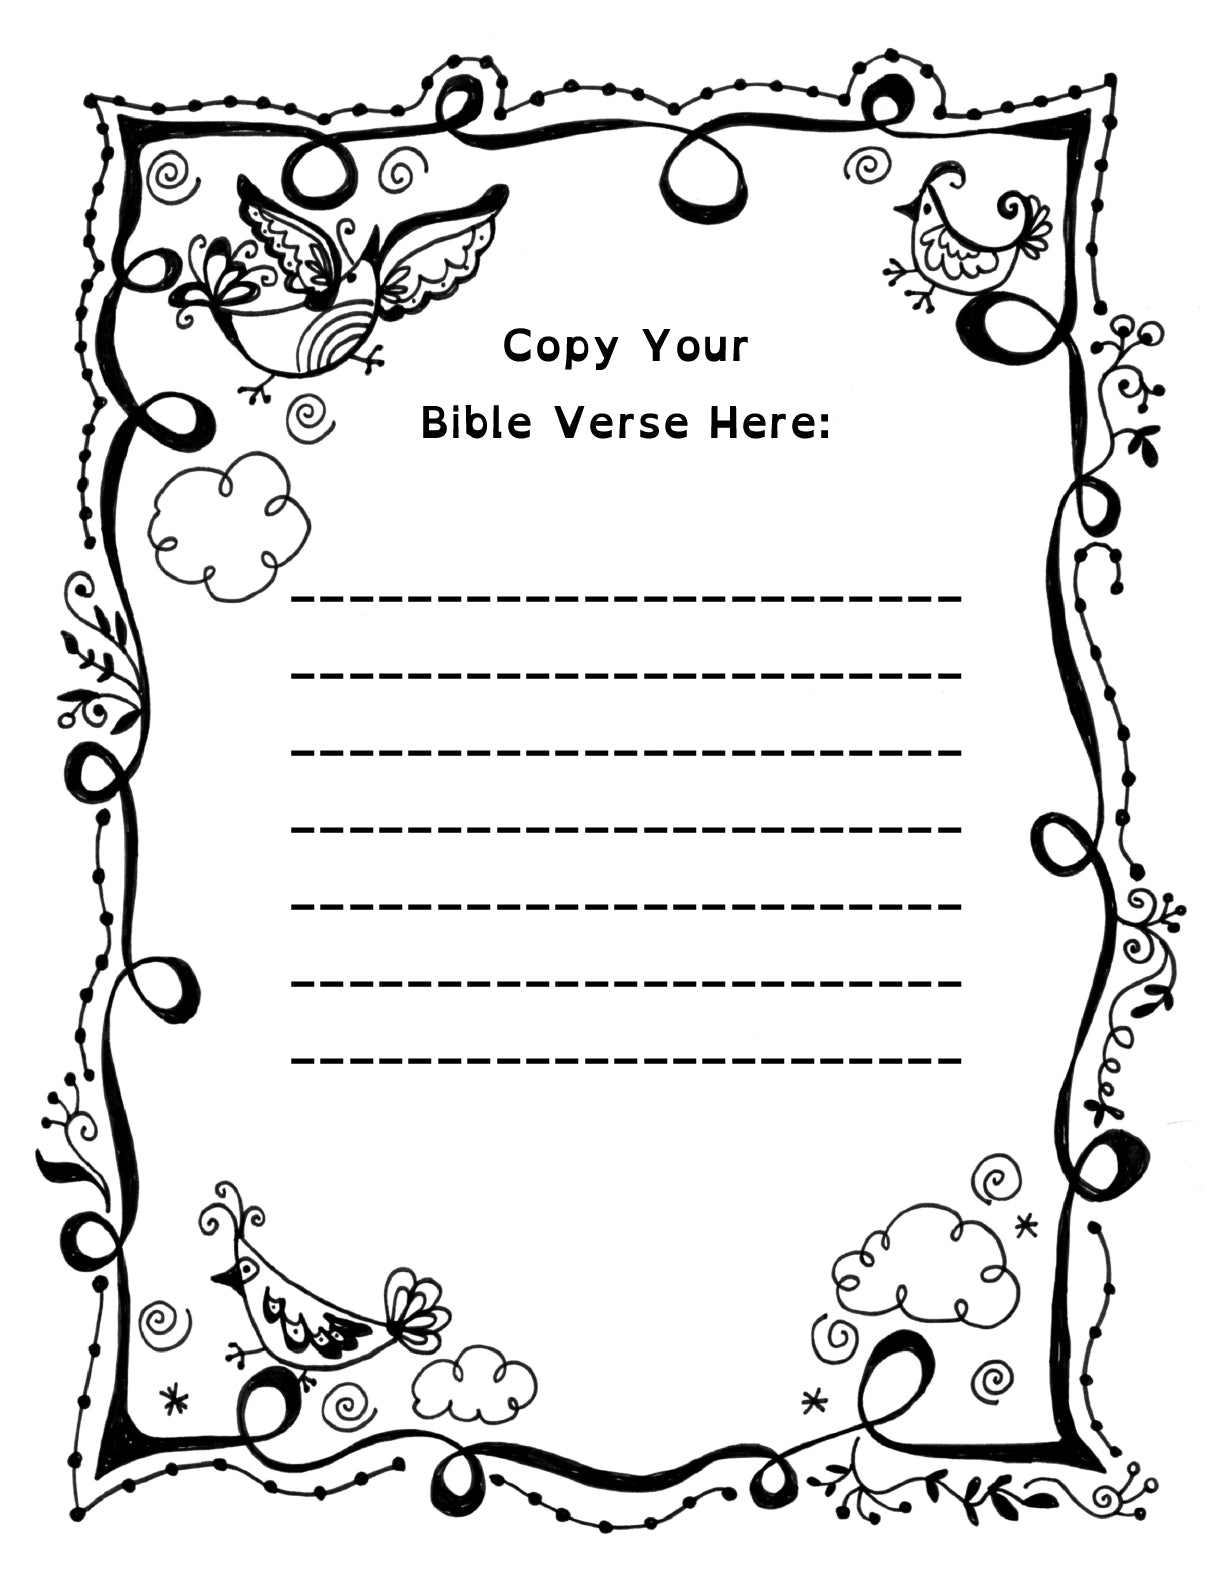 (Age 5+) 100 Easy Bible Verses - Teach Your Child to Read, Write & Spell